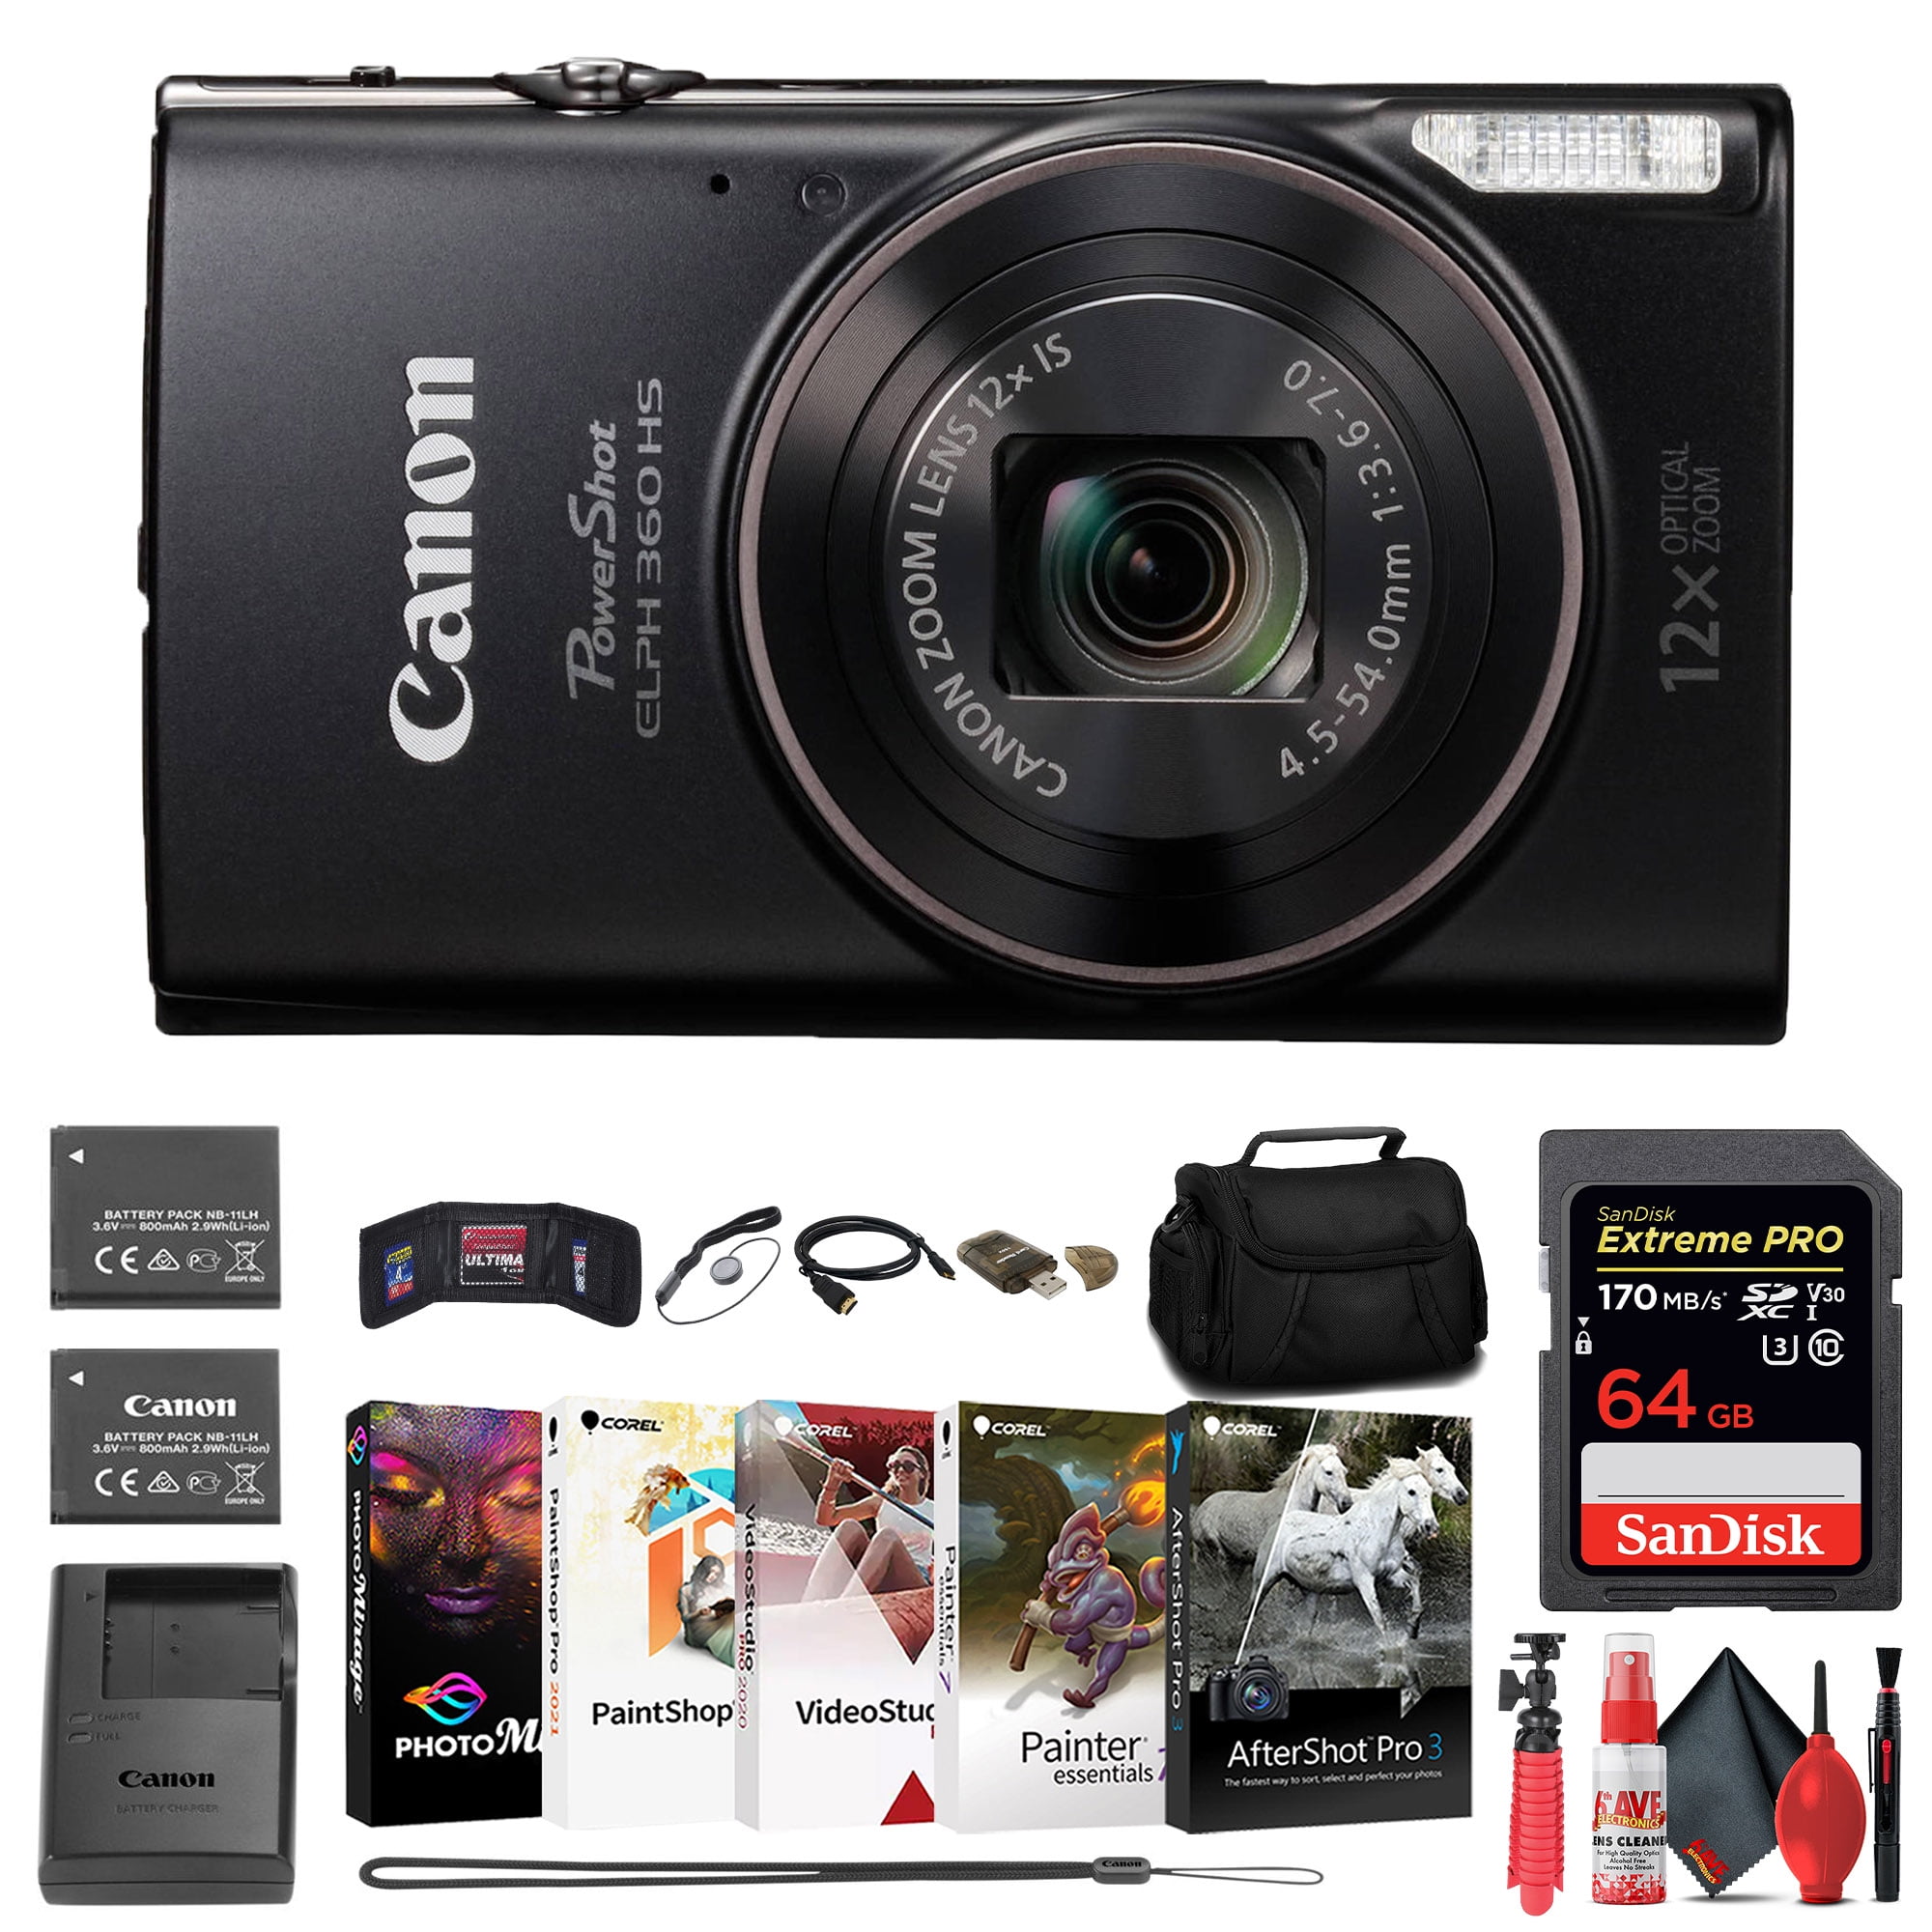  Canon PowerShot G7 X Mark III Digital Camera (Silver)  (3638C001) + 64GB Memory Card + NB13L Battery + Charger + Card Reader +  Corel Photo Software + HDMI Cable + Case + Flex Tripod + More (Renewed) :  Electronics